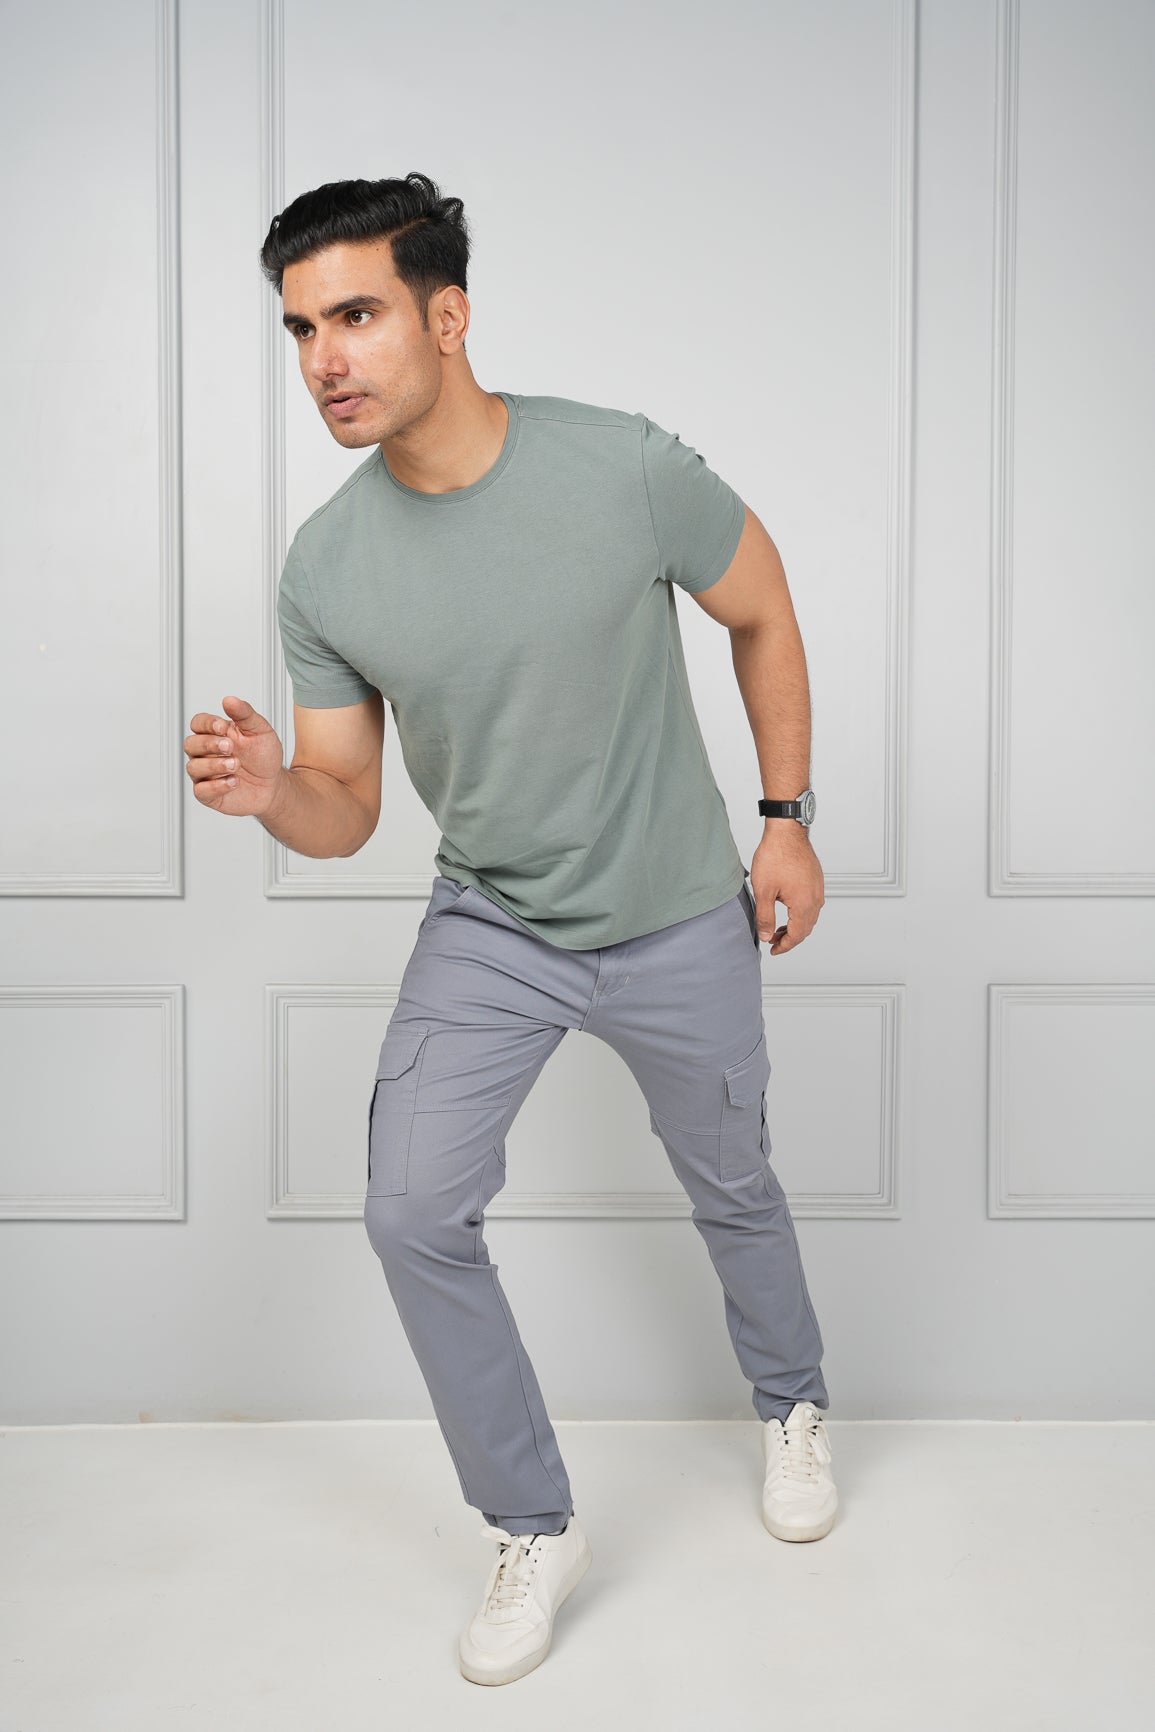 Grey Cargo Pants Outfit for Men